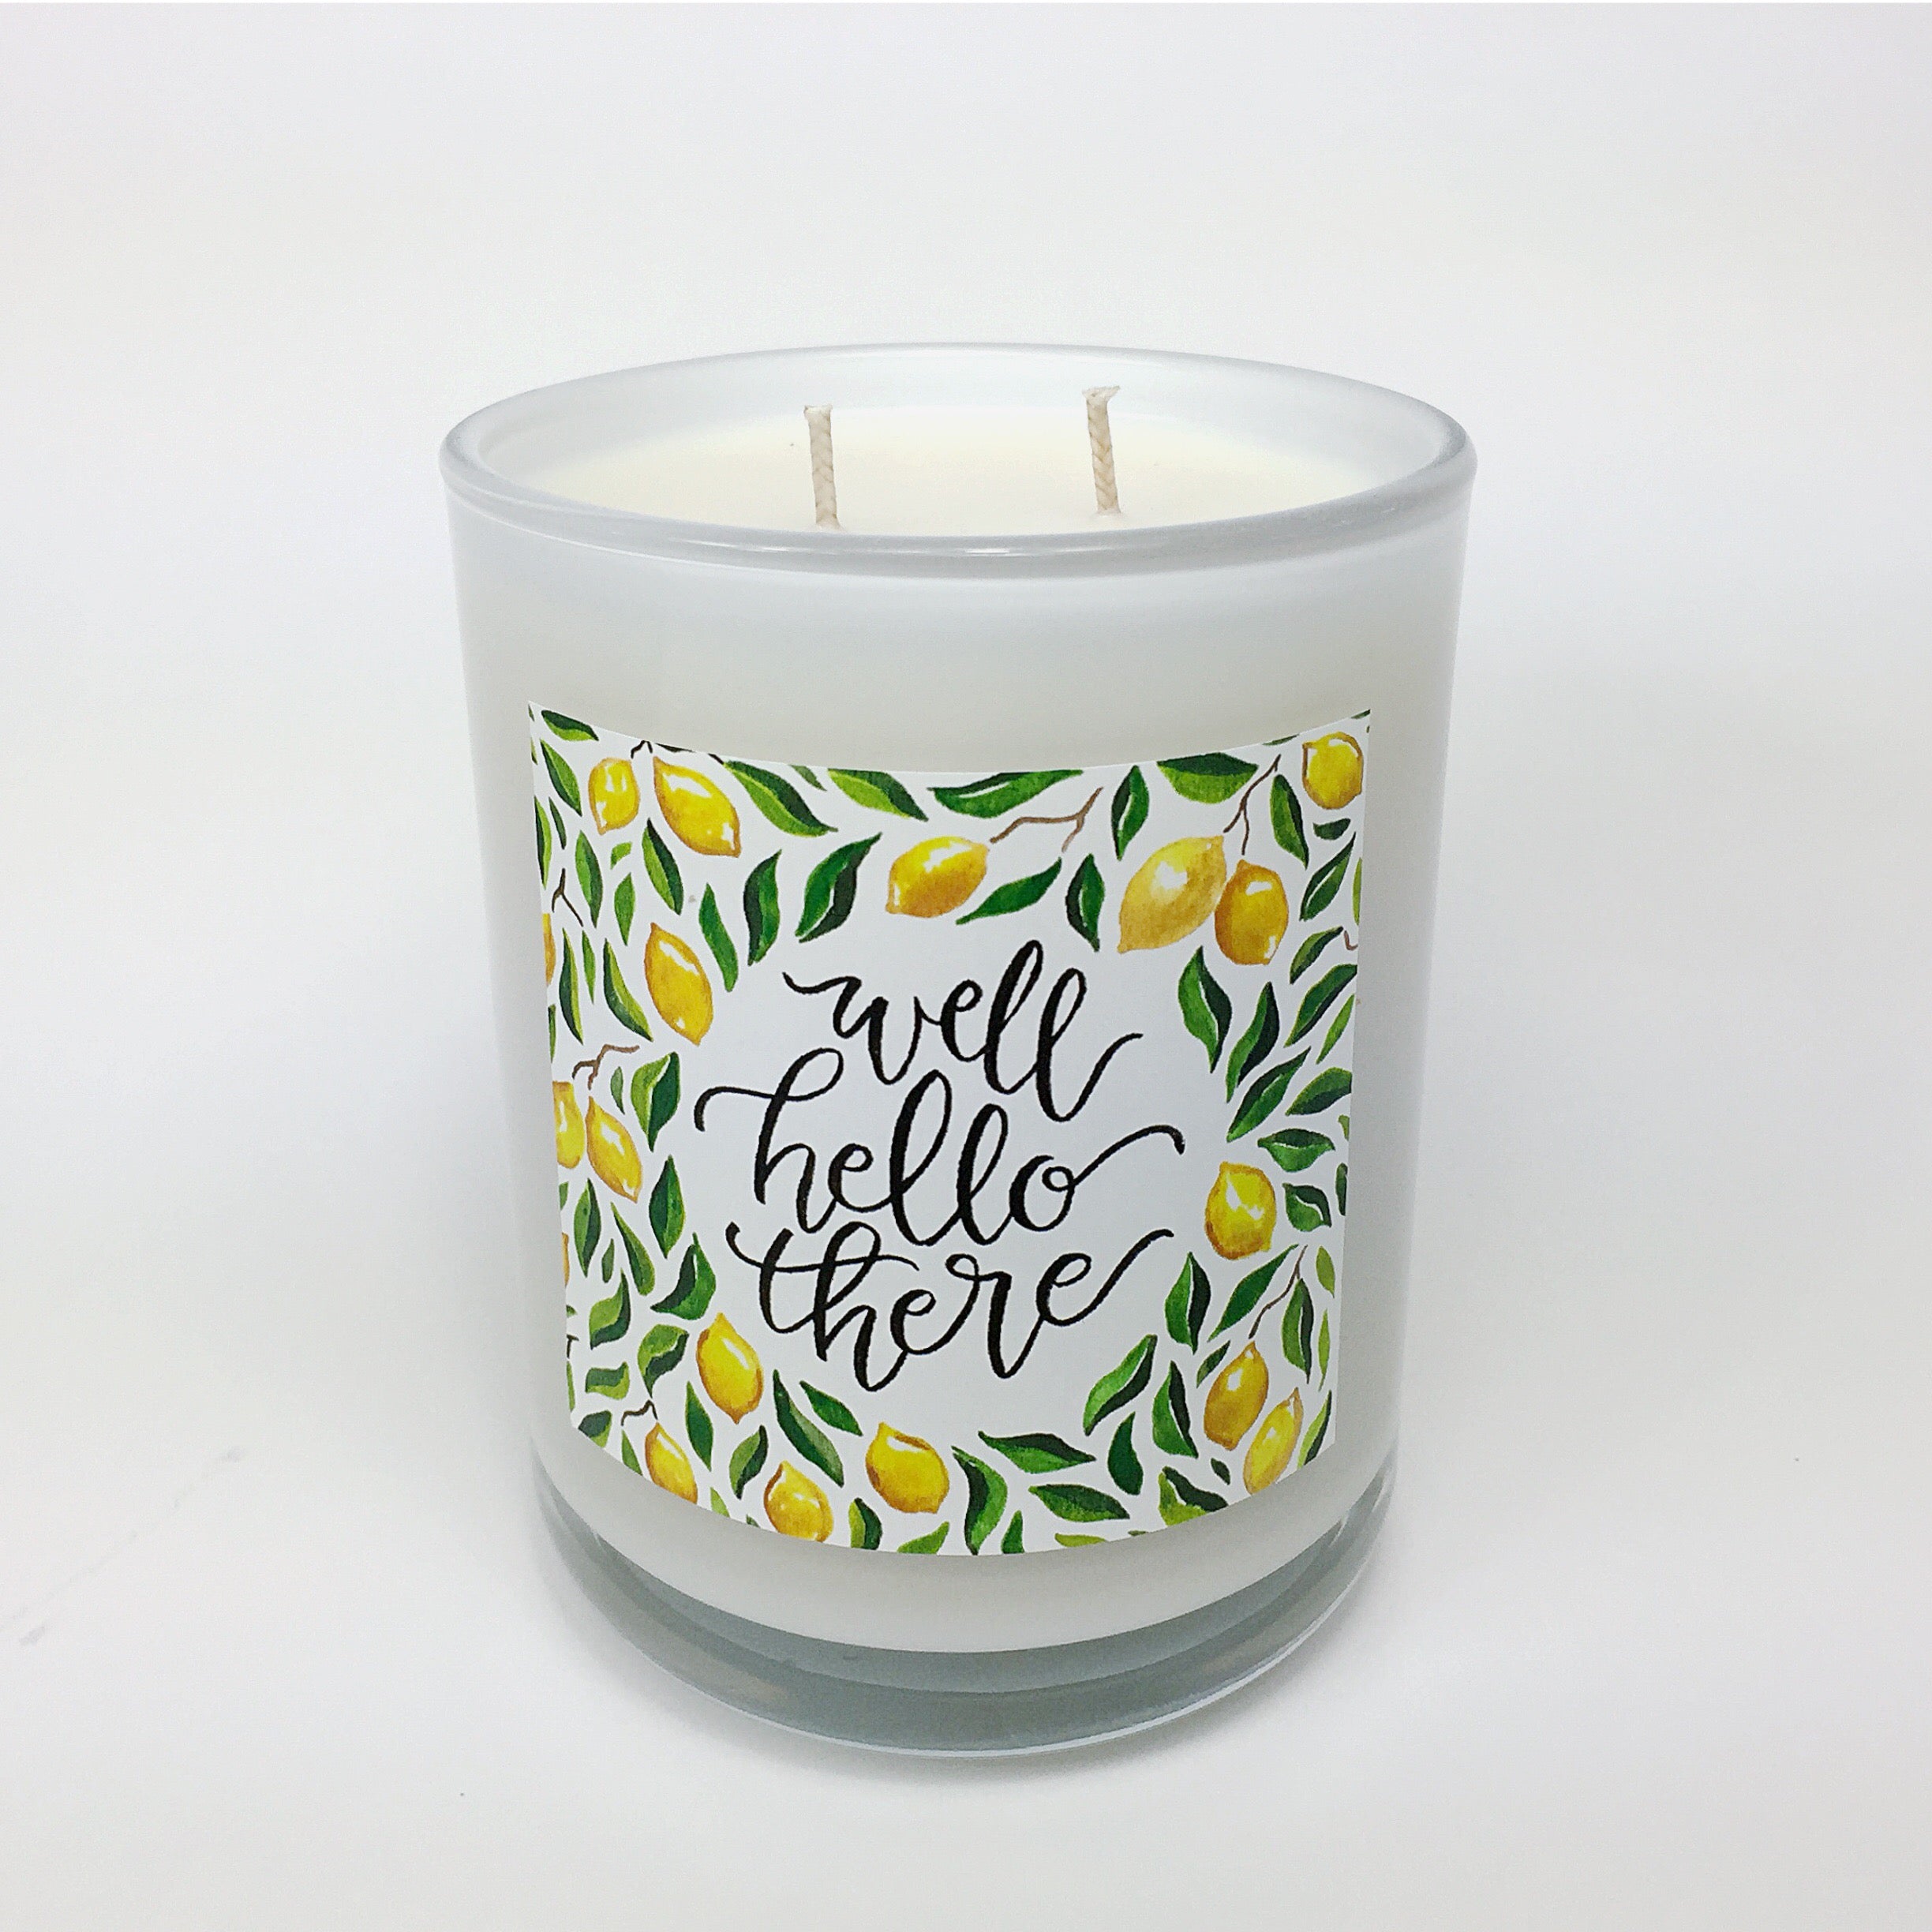 WELL HELLO THERE. Lemon Verbena Coconut Wax Blend Candle.